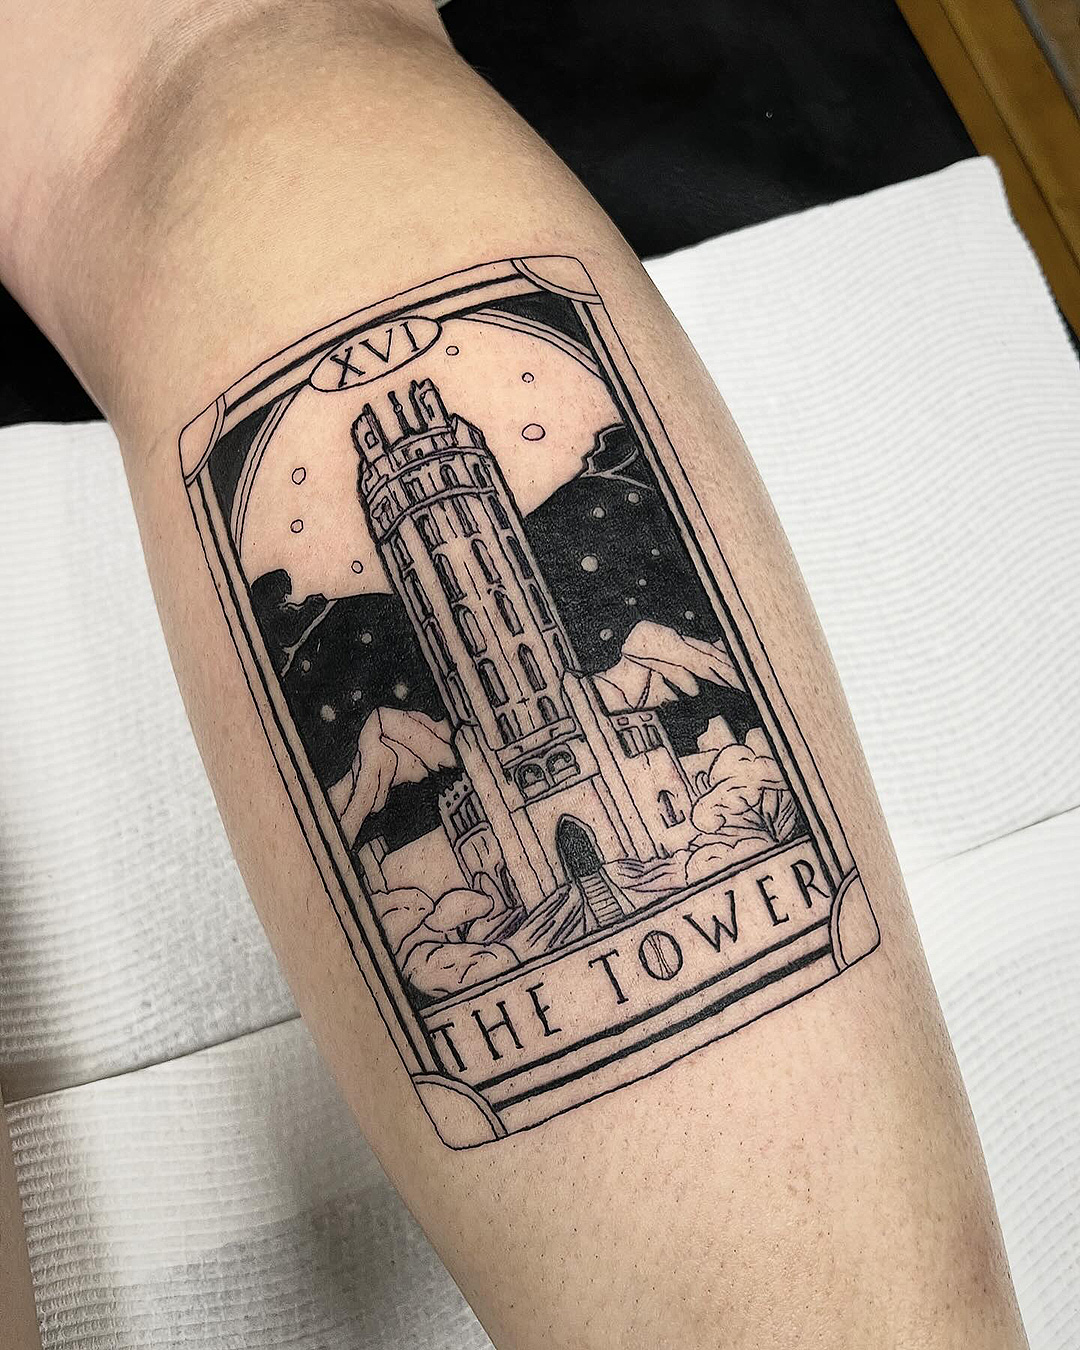 Someone with a tarot card tattoo from Sunset.